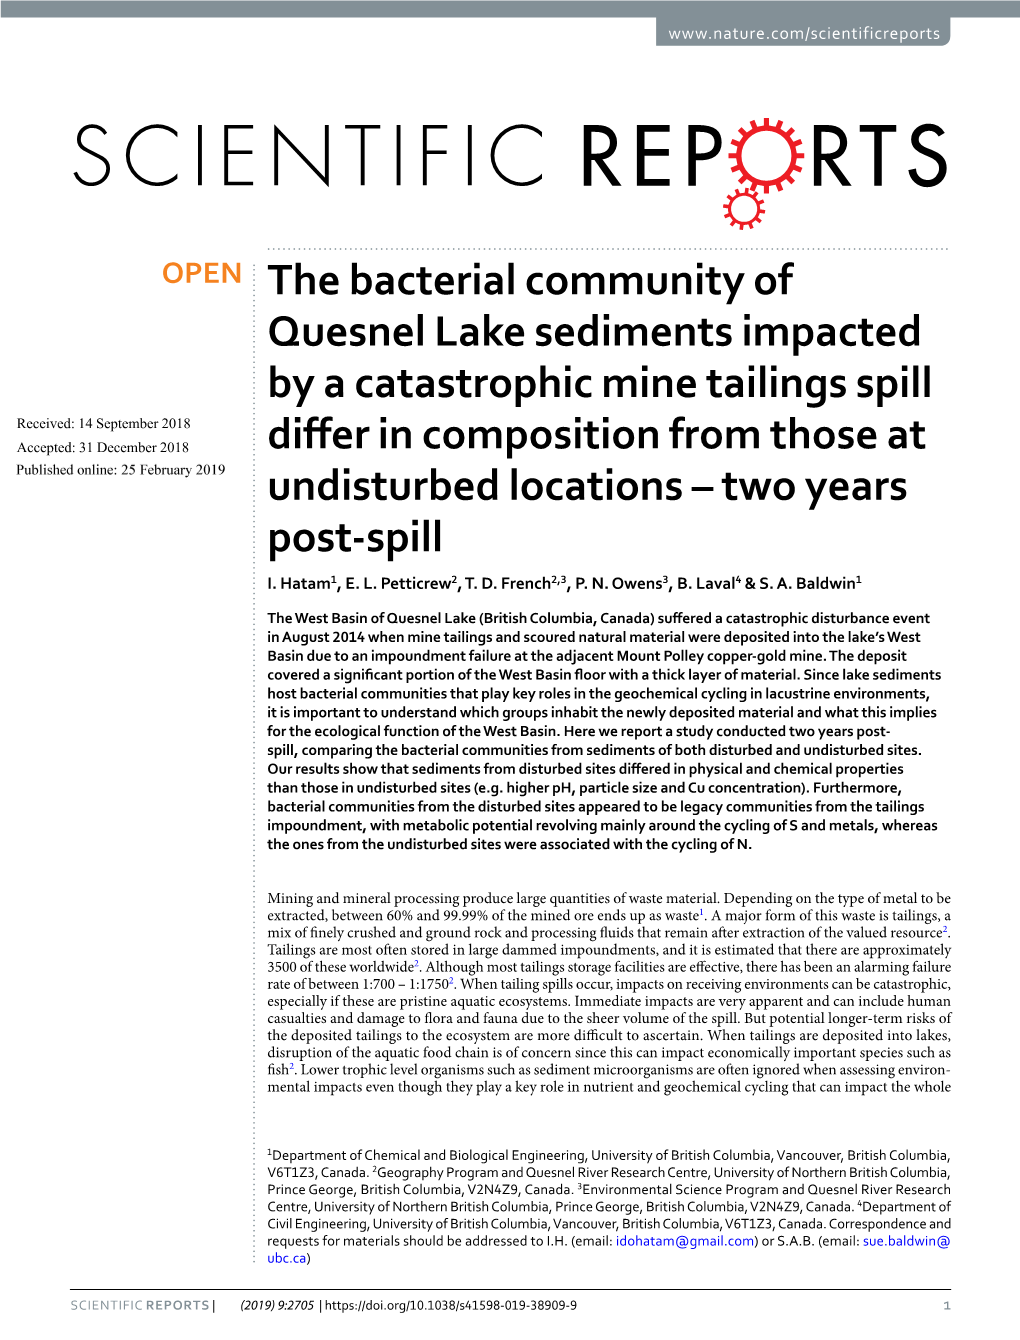 The Bacterial Community of Quesnel Lake Sediments Impacted by A